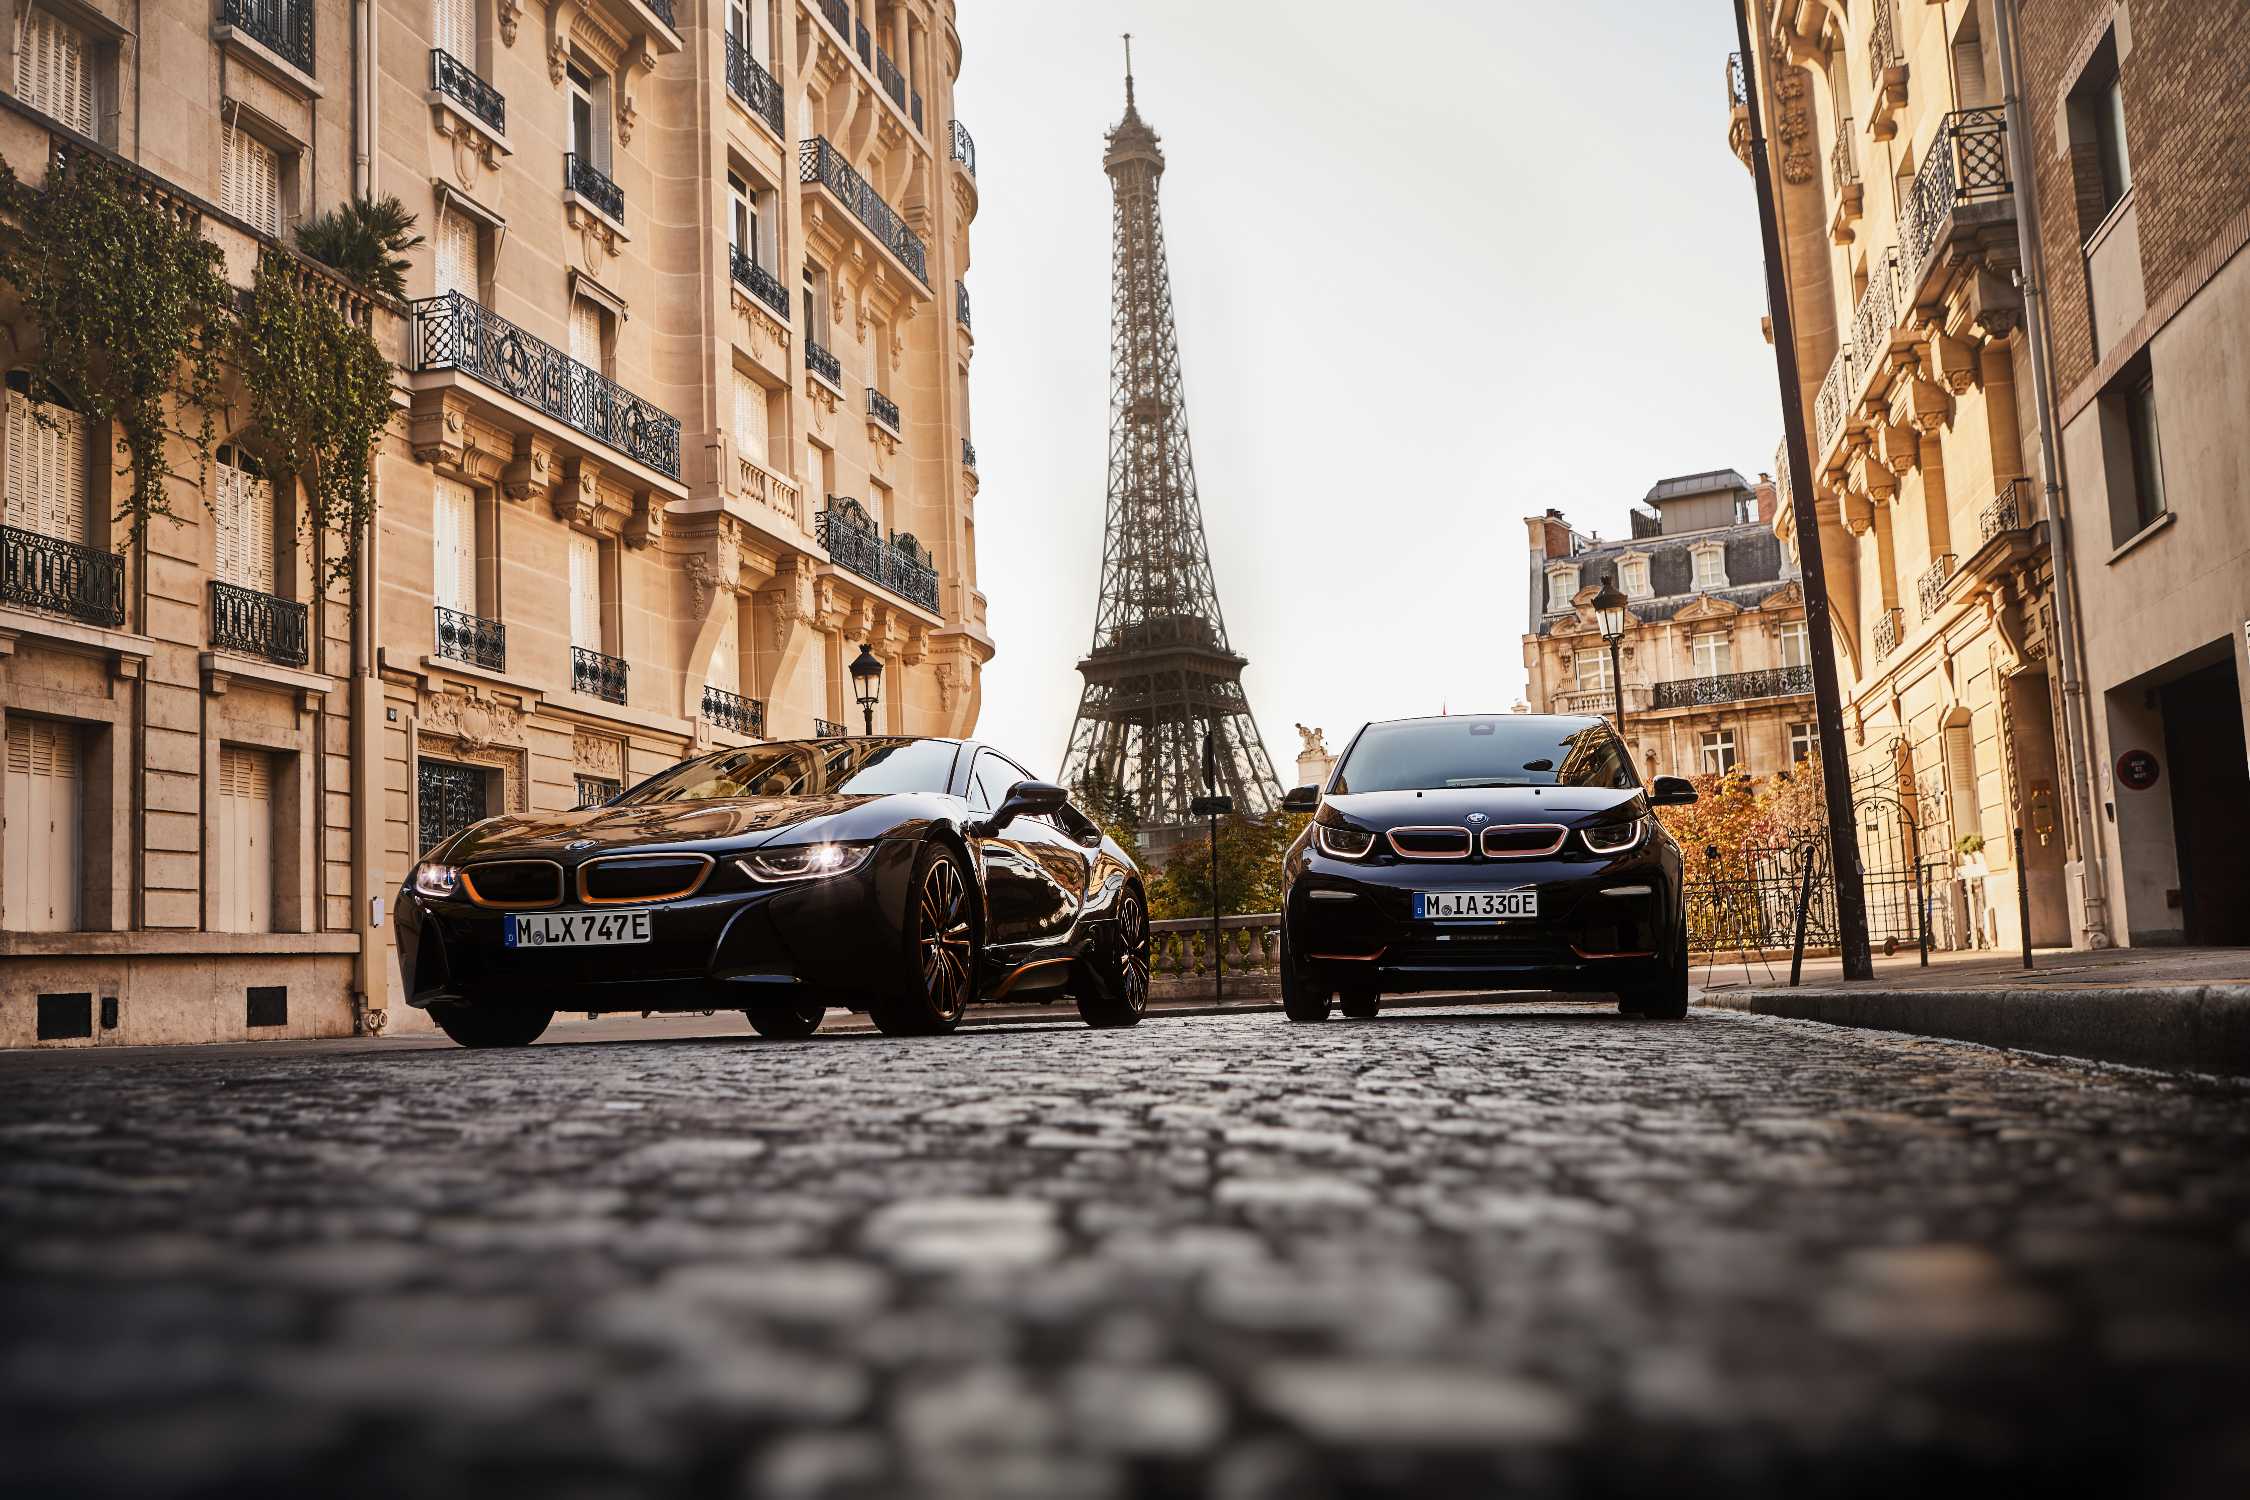 The Bmw I3s Edition Roadstyle And The Bmw I8 Coupe In The Ultimate Sophisto Edition 09 2019